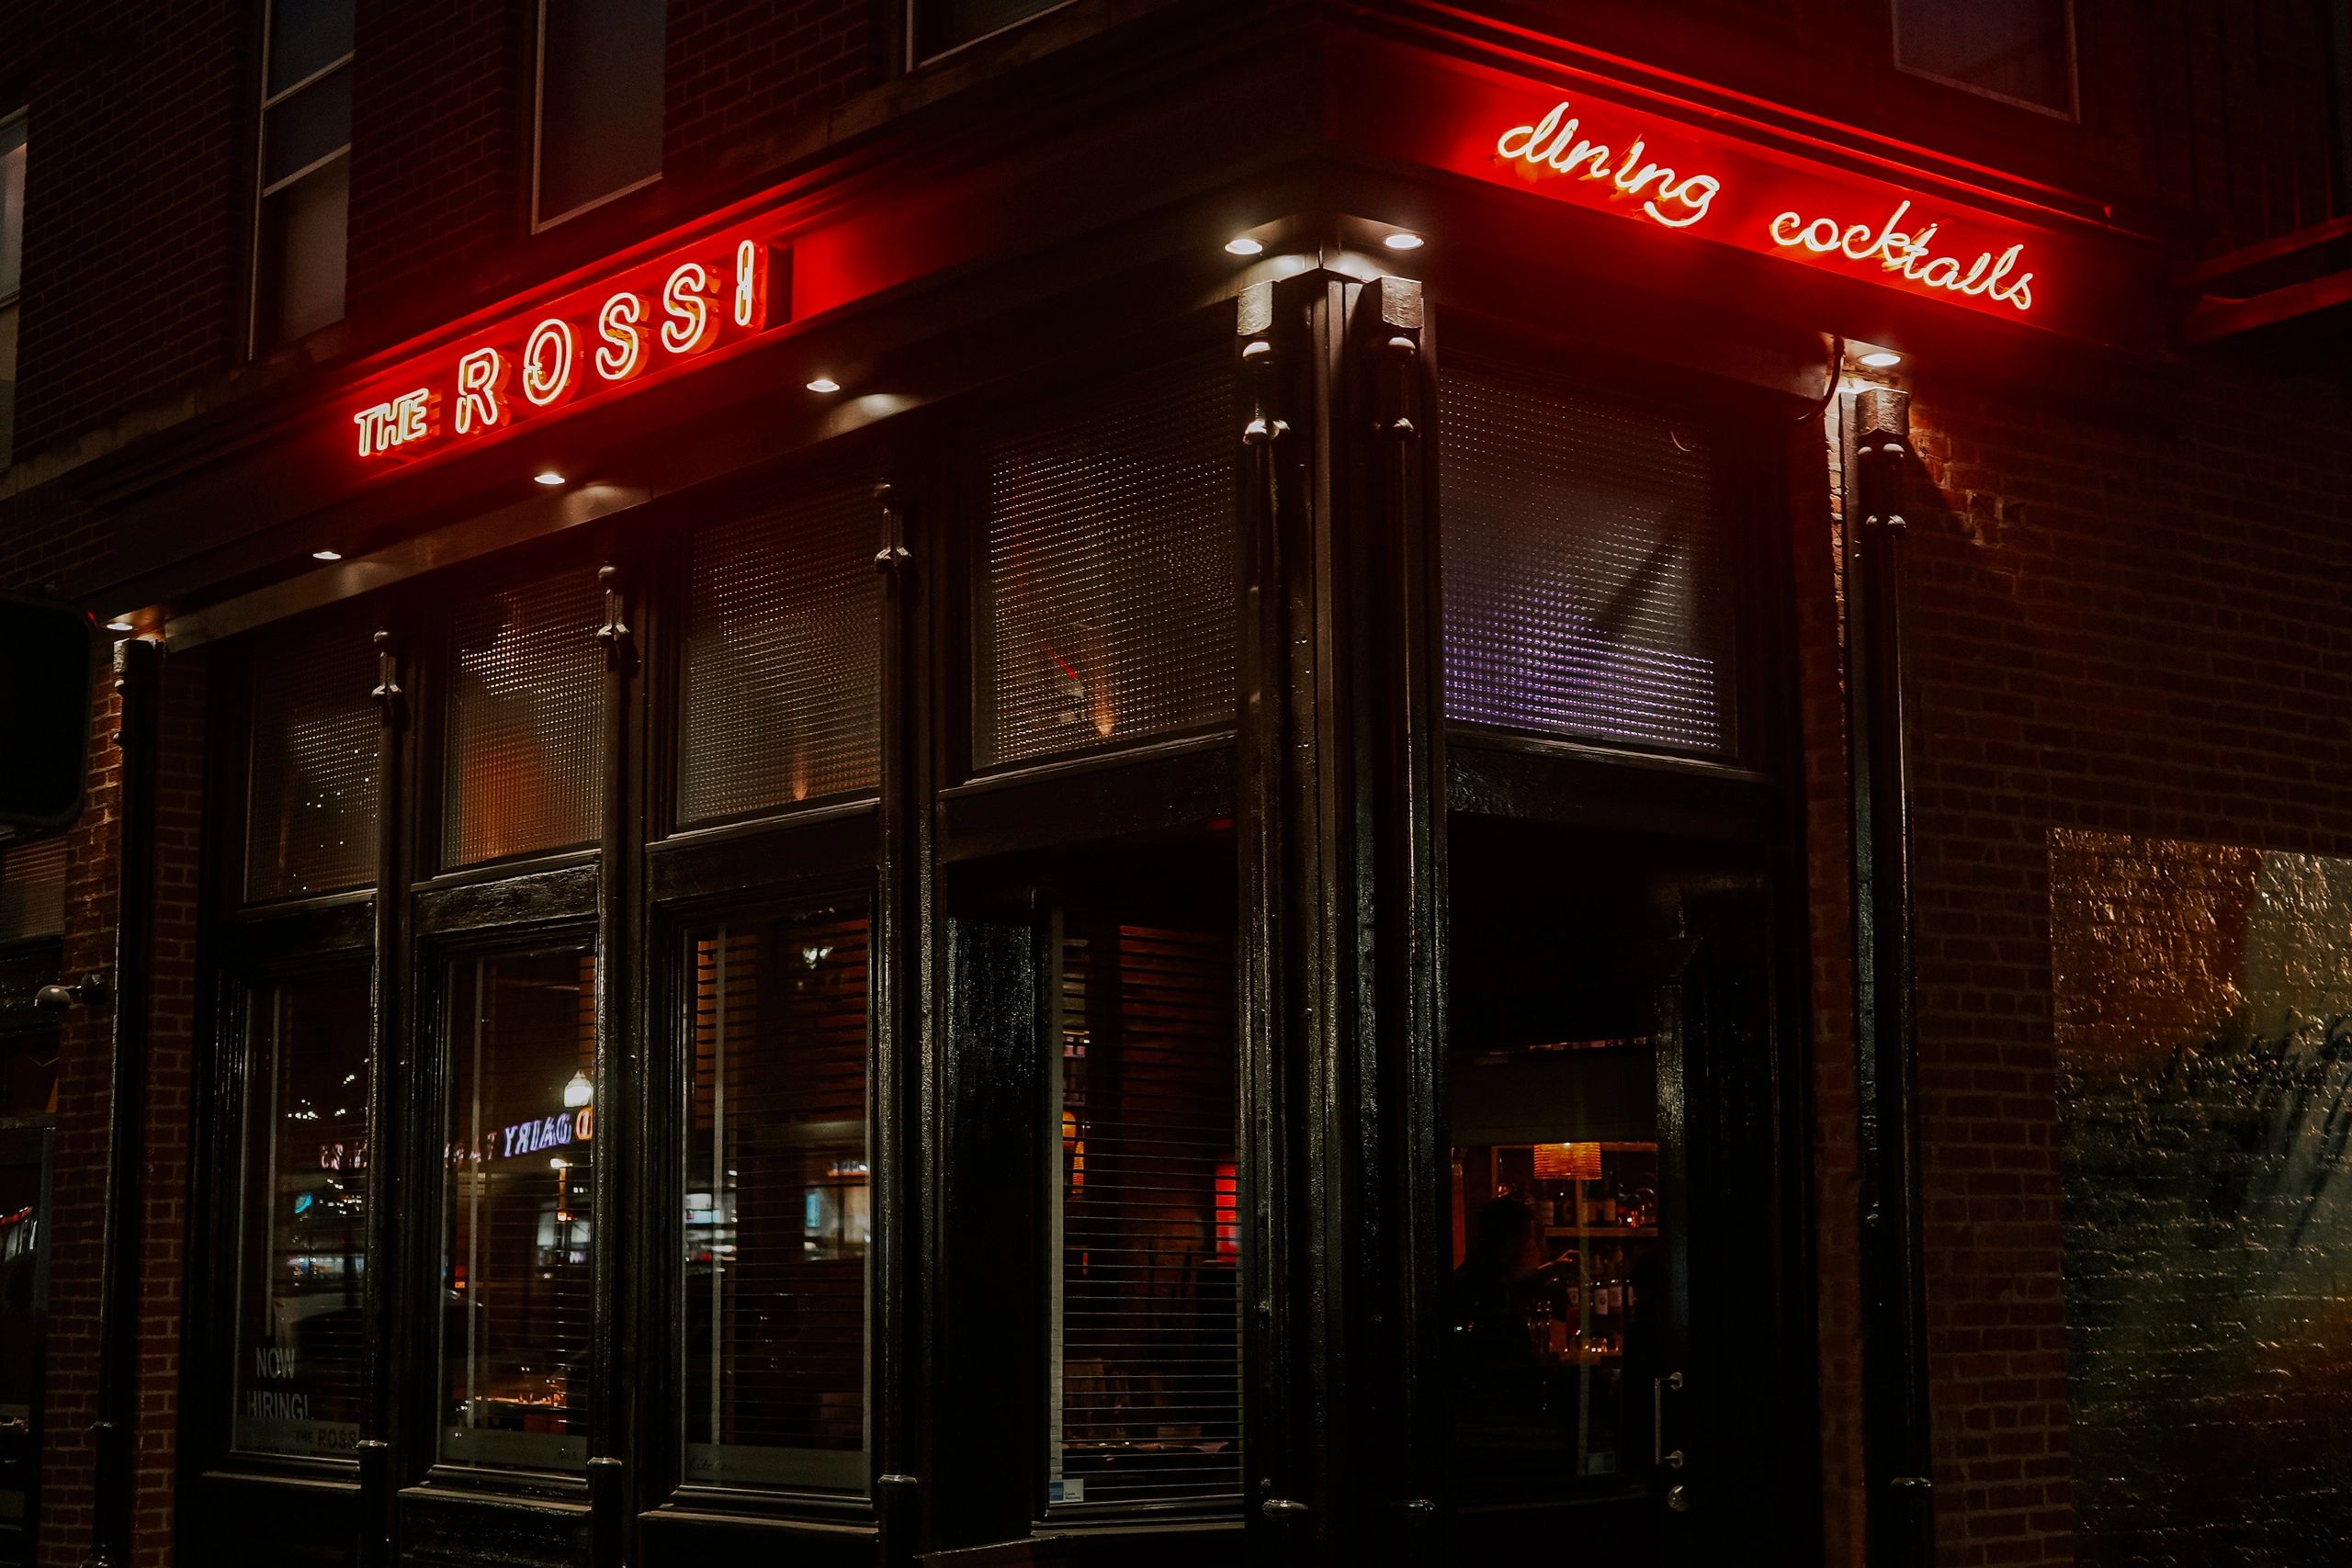 the rossi kitchen and bar photos